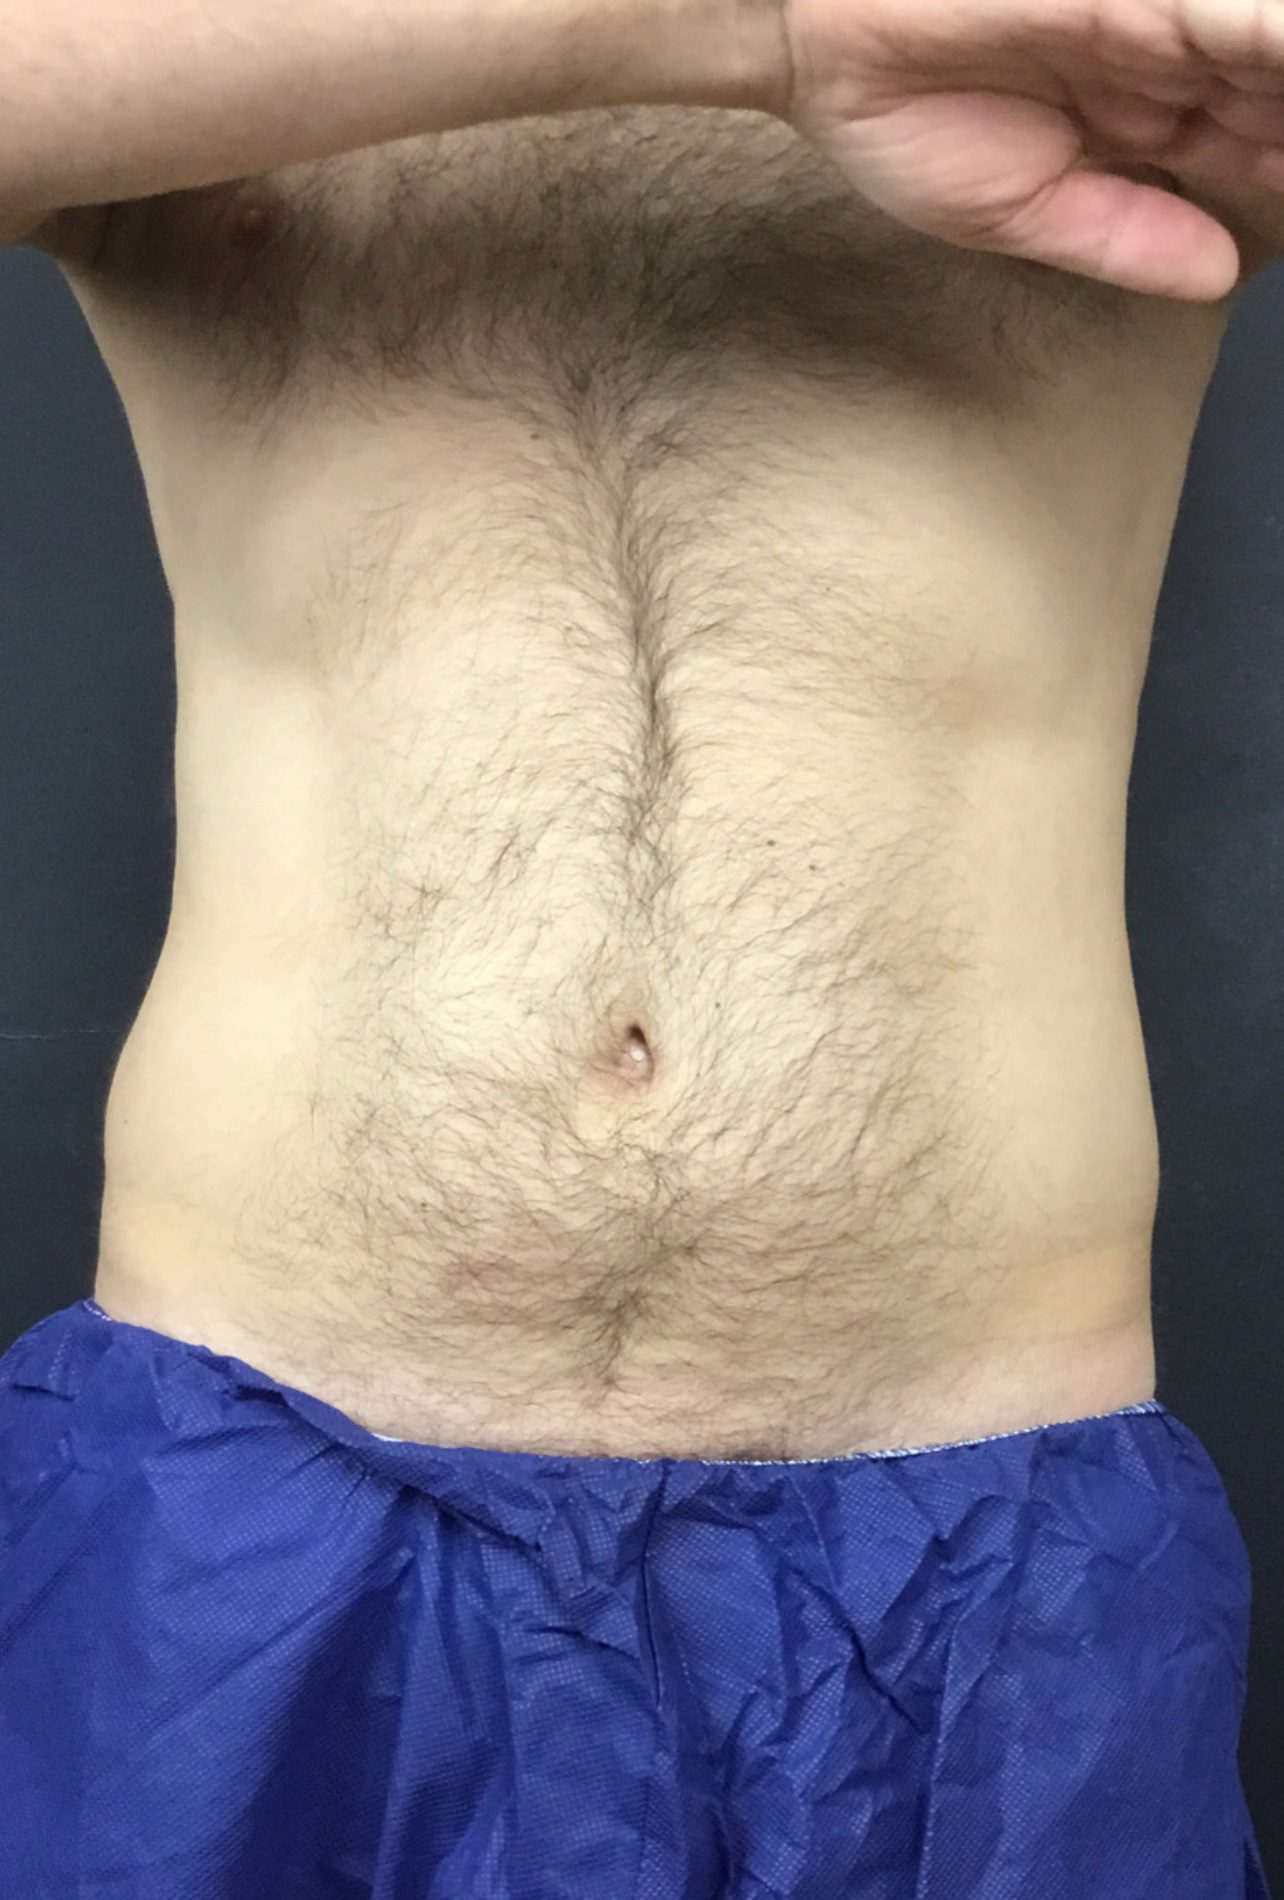 coolsculpting fat freezing muffin top flanks before